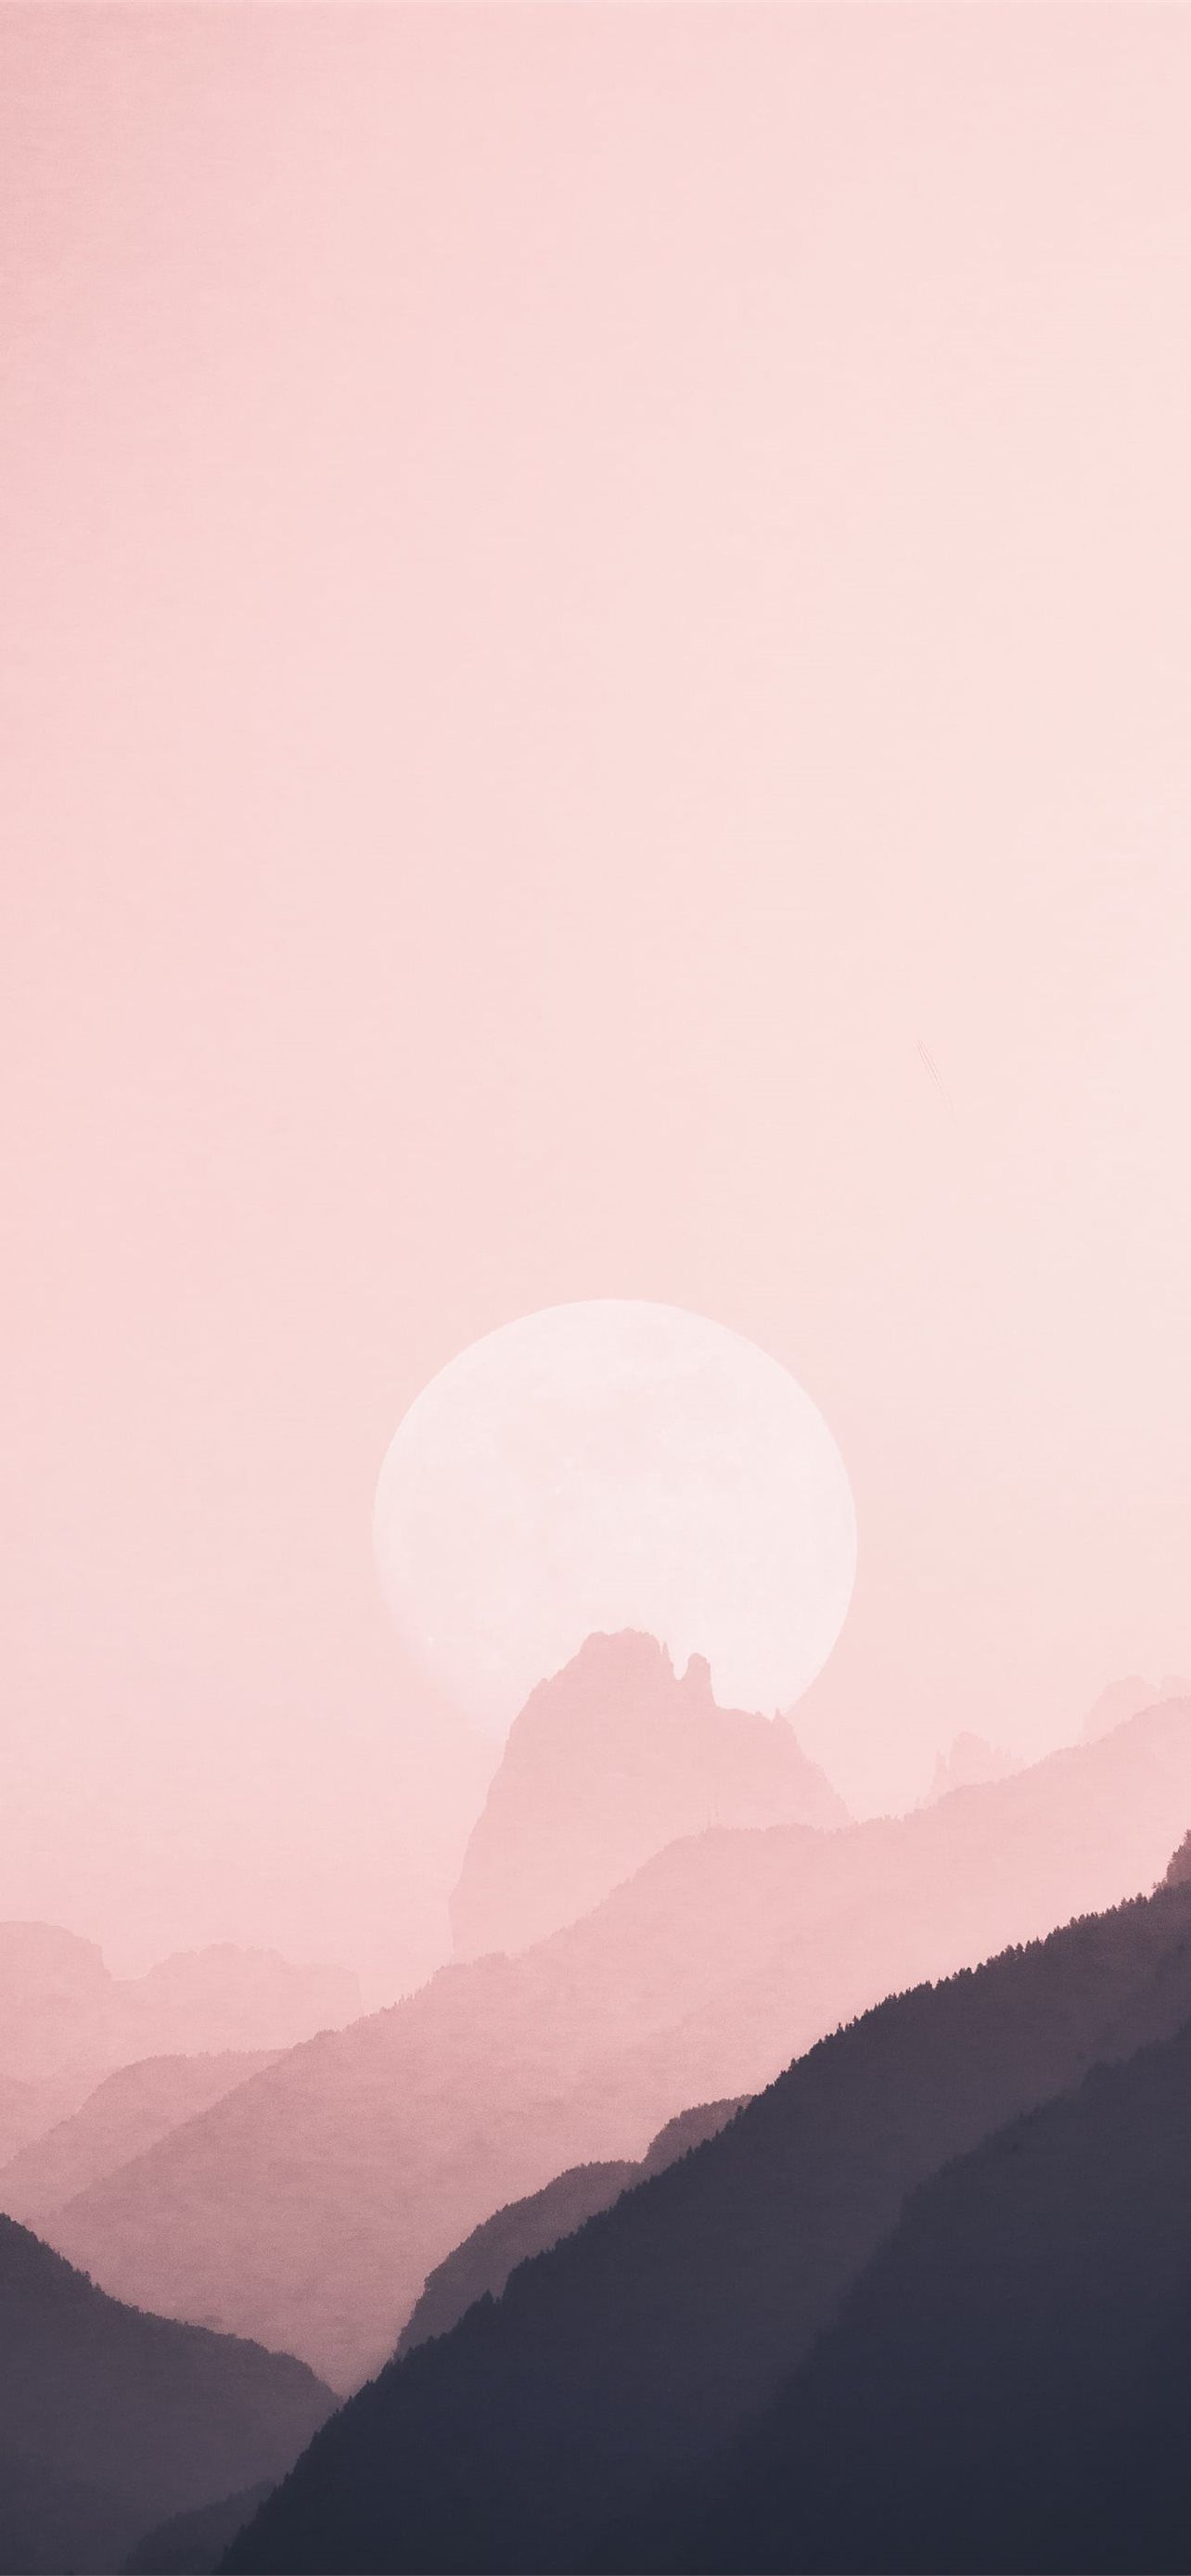 A pink sky with mountains in the background - TikTok